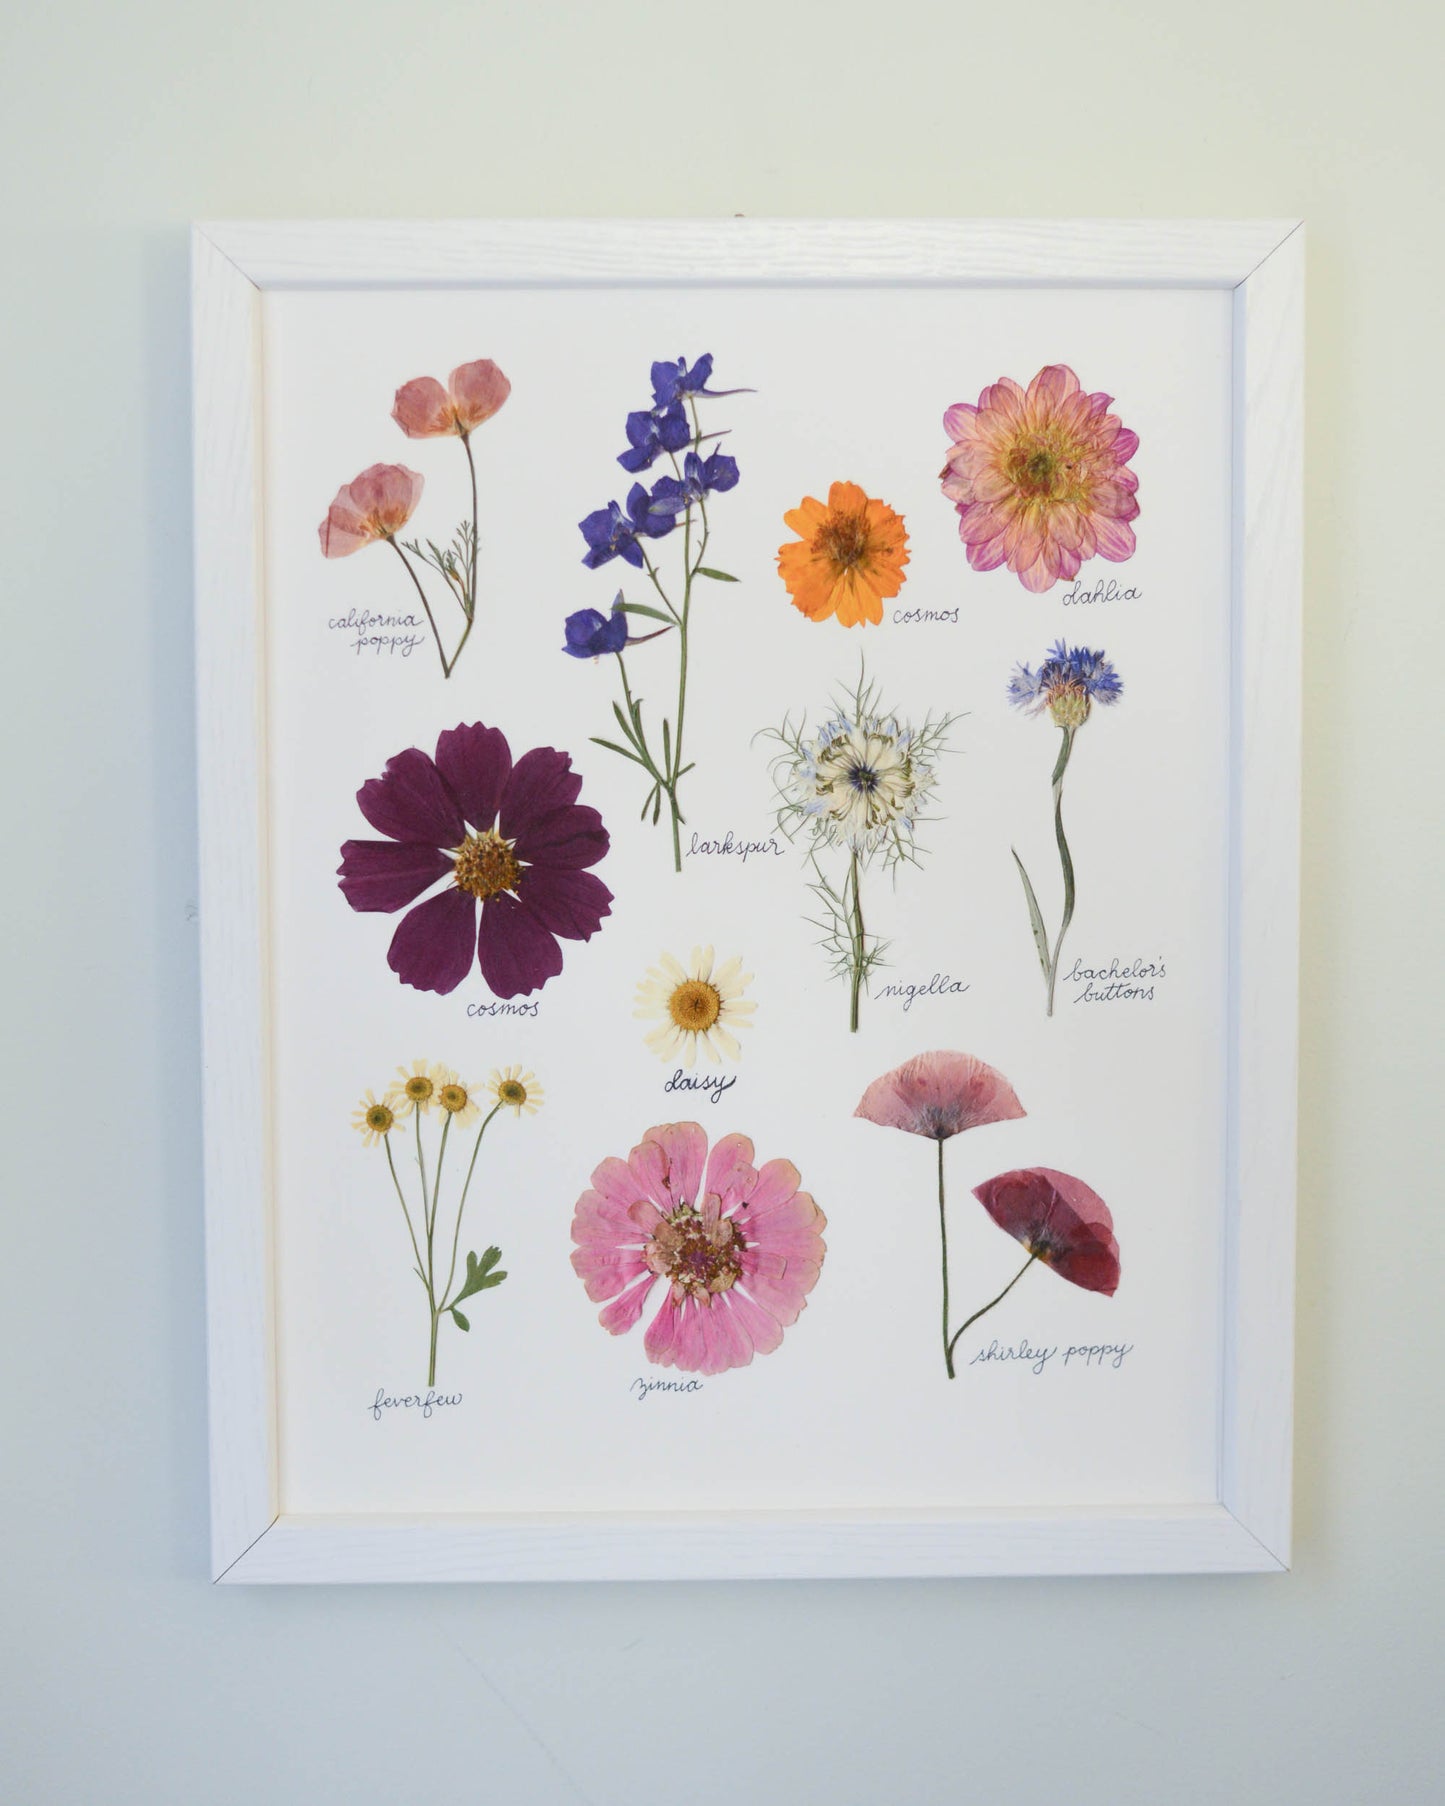 A Year in the Garden - Art Print of Pressed Flowers